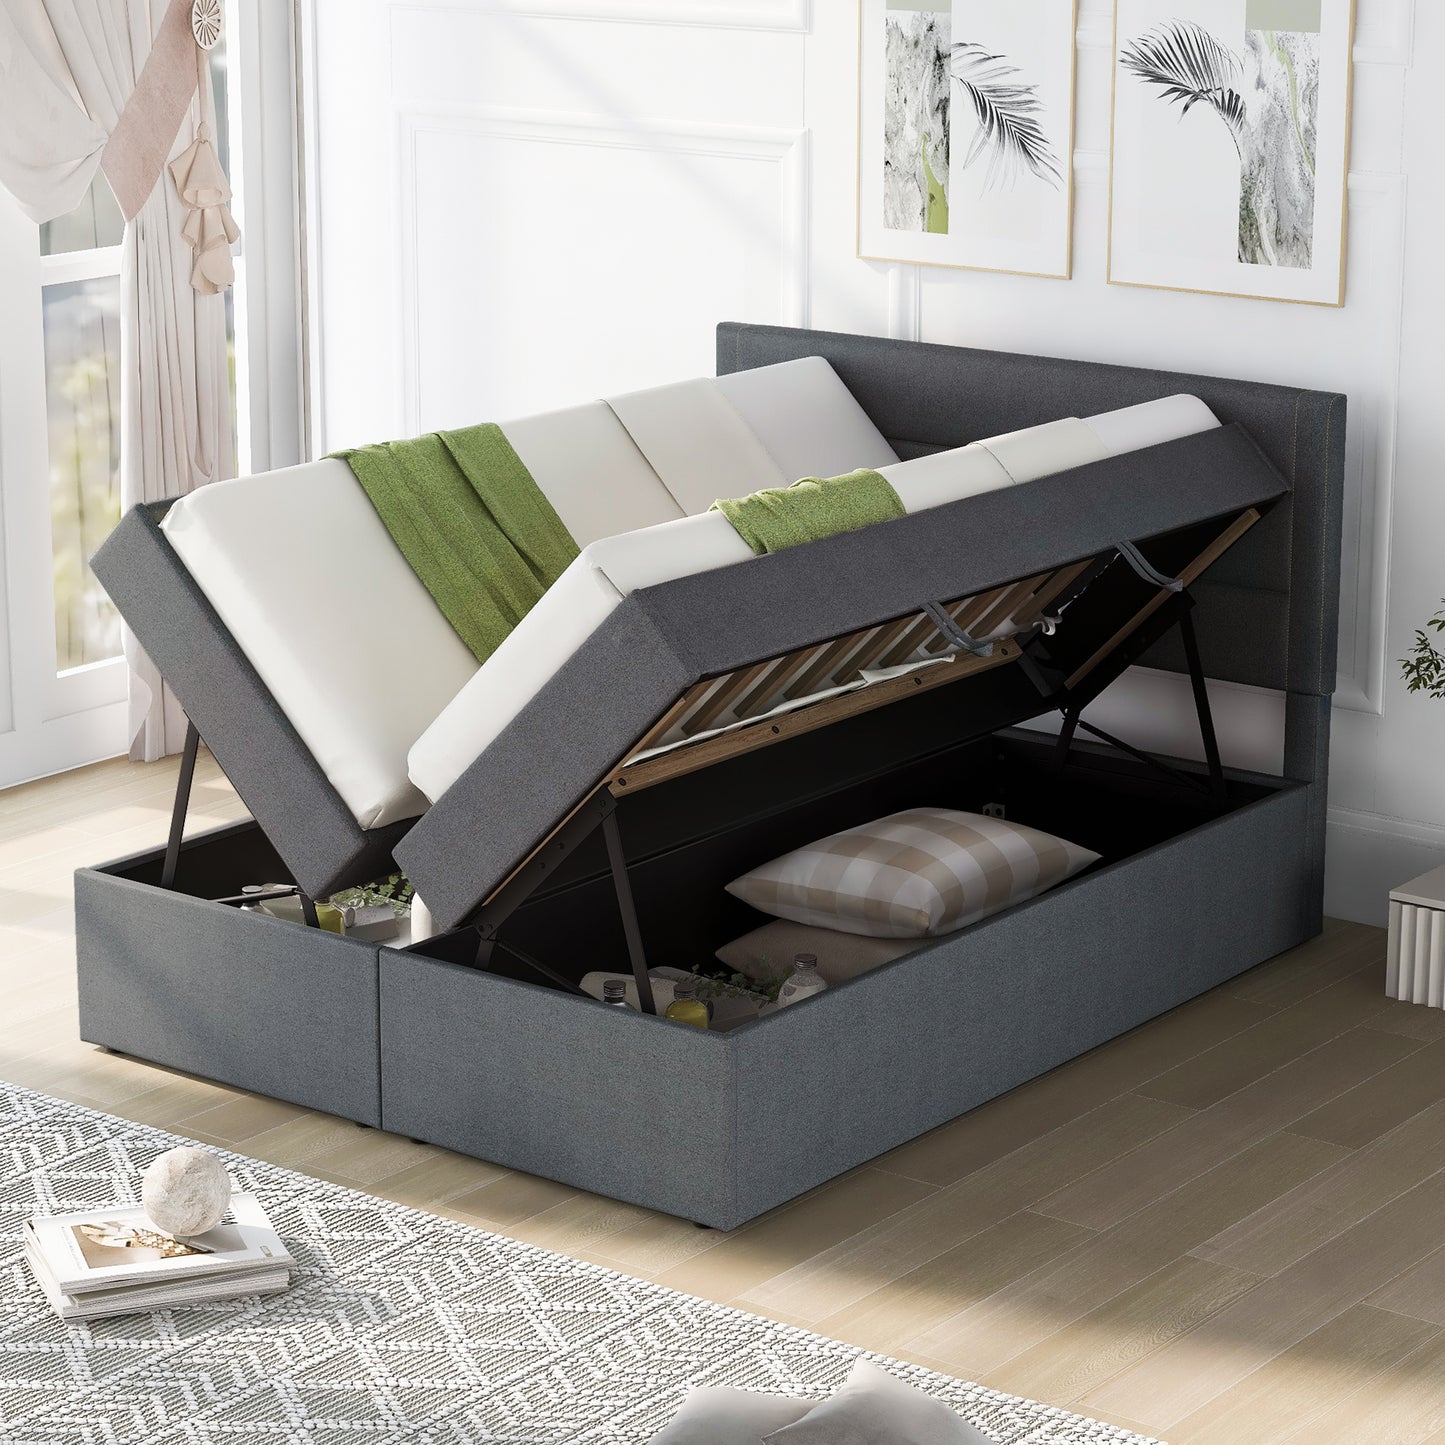 Queen Size Upholstered Platform Bed with Storage Underneath, Gray